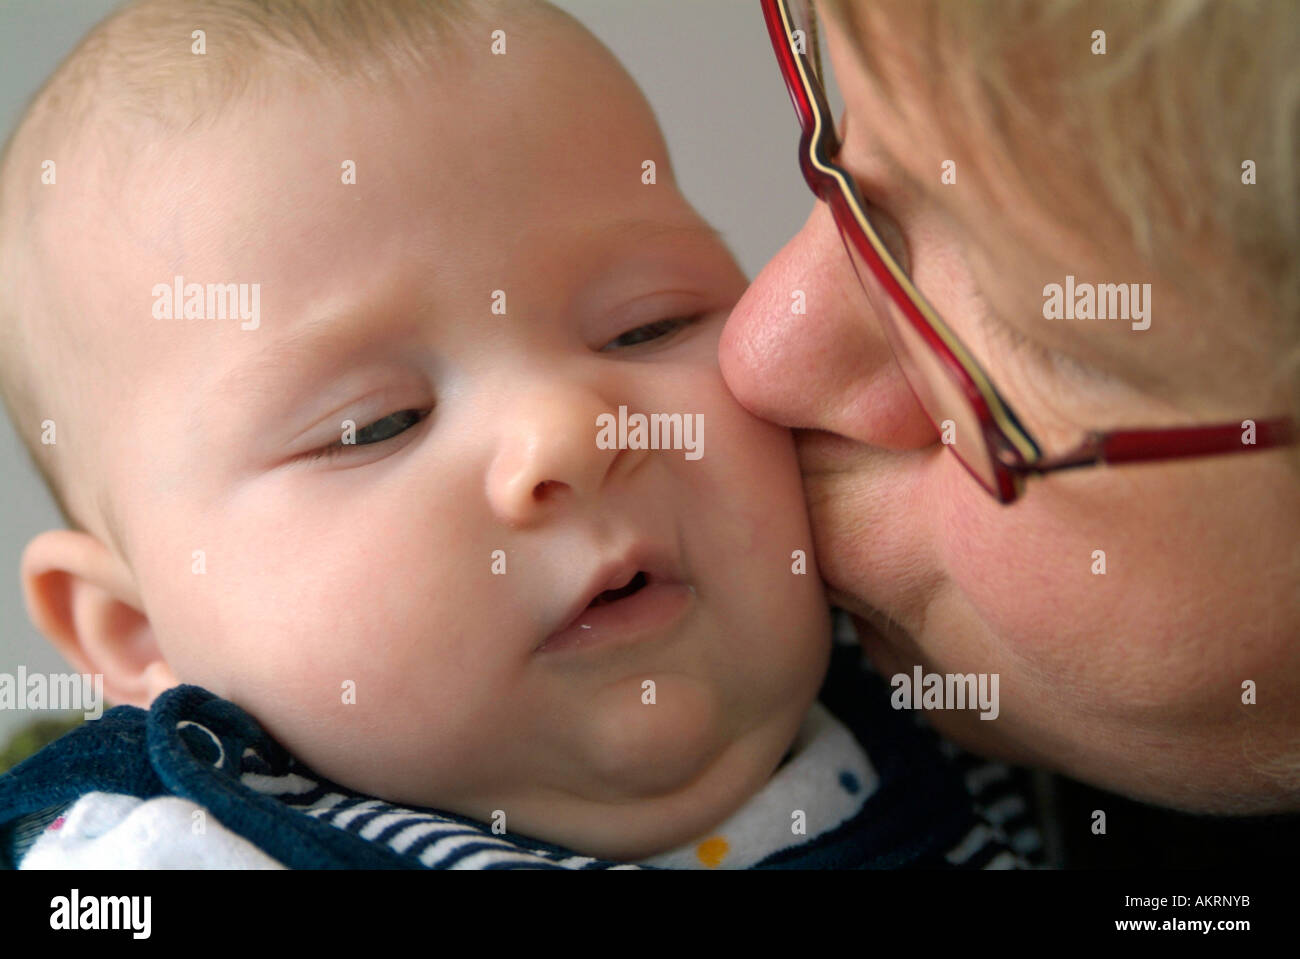 grandmother and grandchild baby of 6 months and a woman in age of about 45 to 50 years Stock Photo